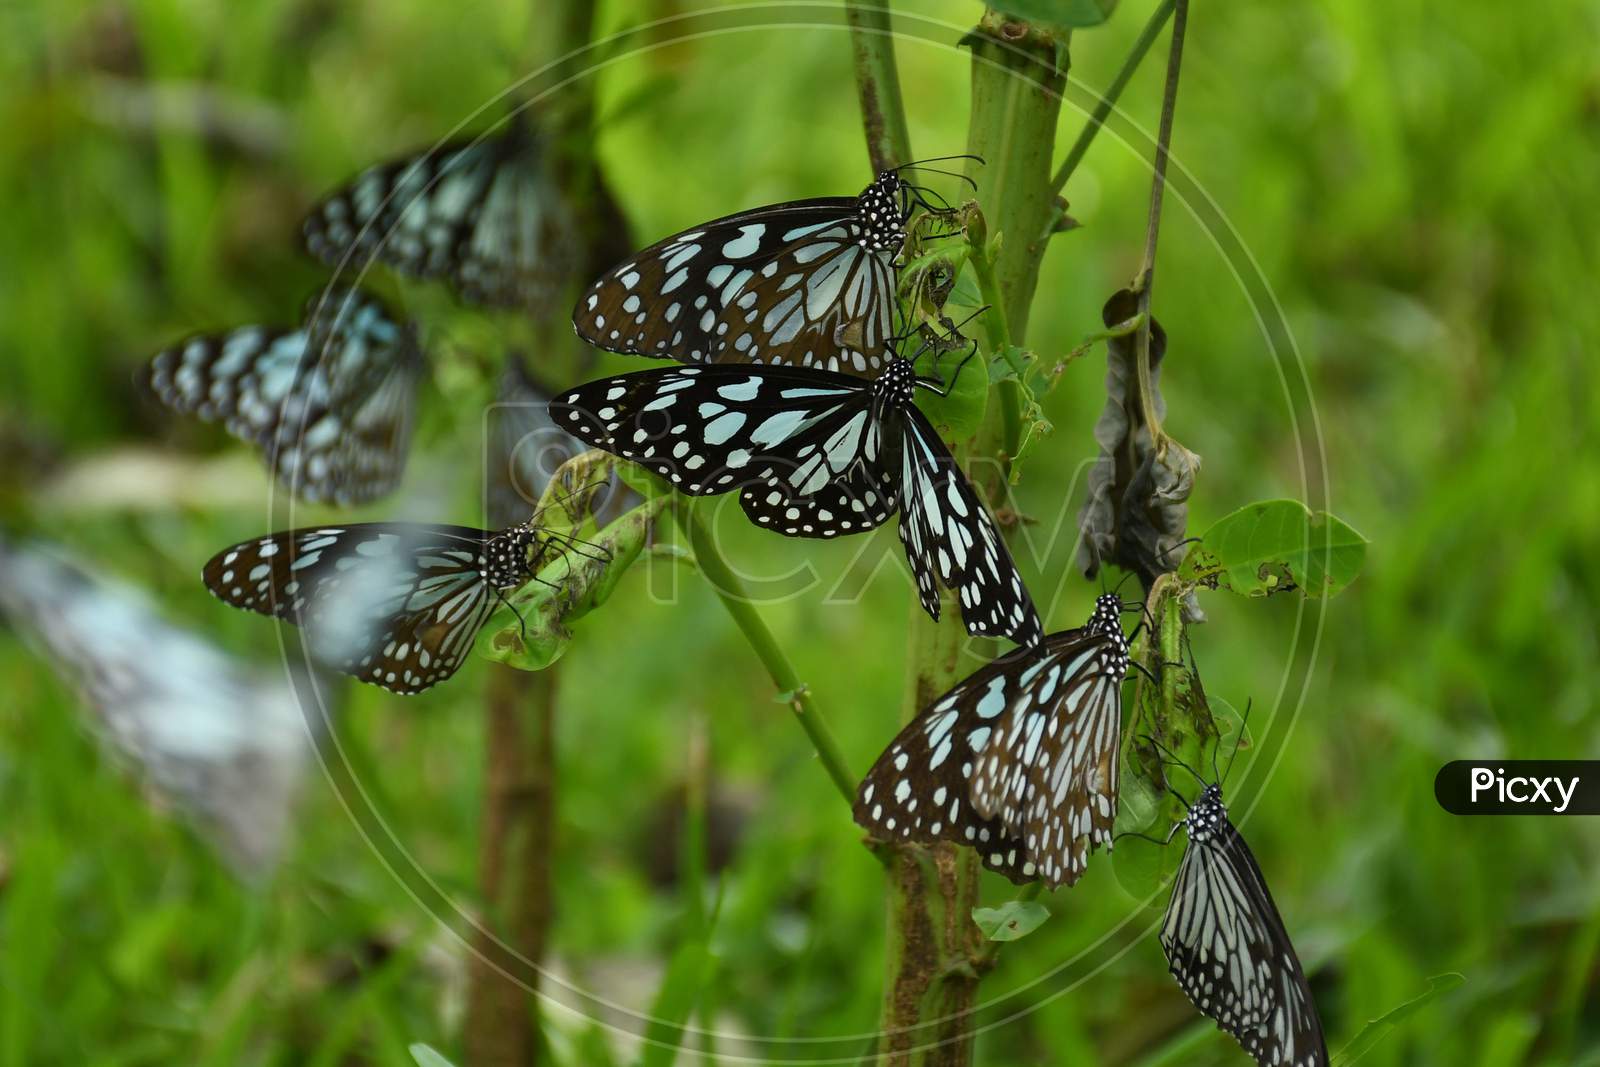 Blue Tiger (Tirumala limniace) are pictured at a park near Koliabor in Nagaon District of Assam on Oct 31,2020.